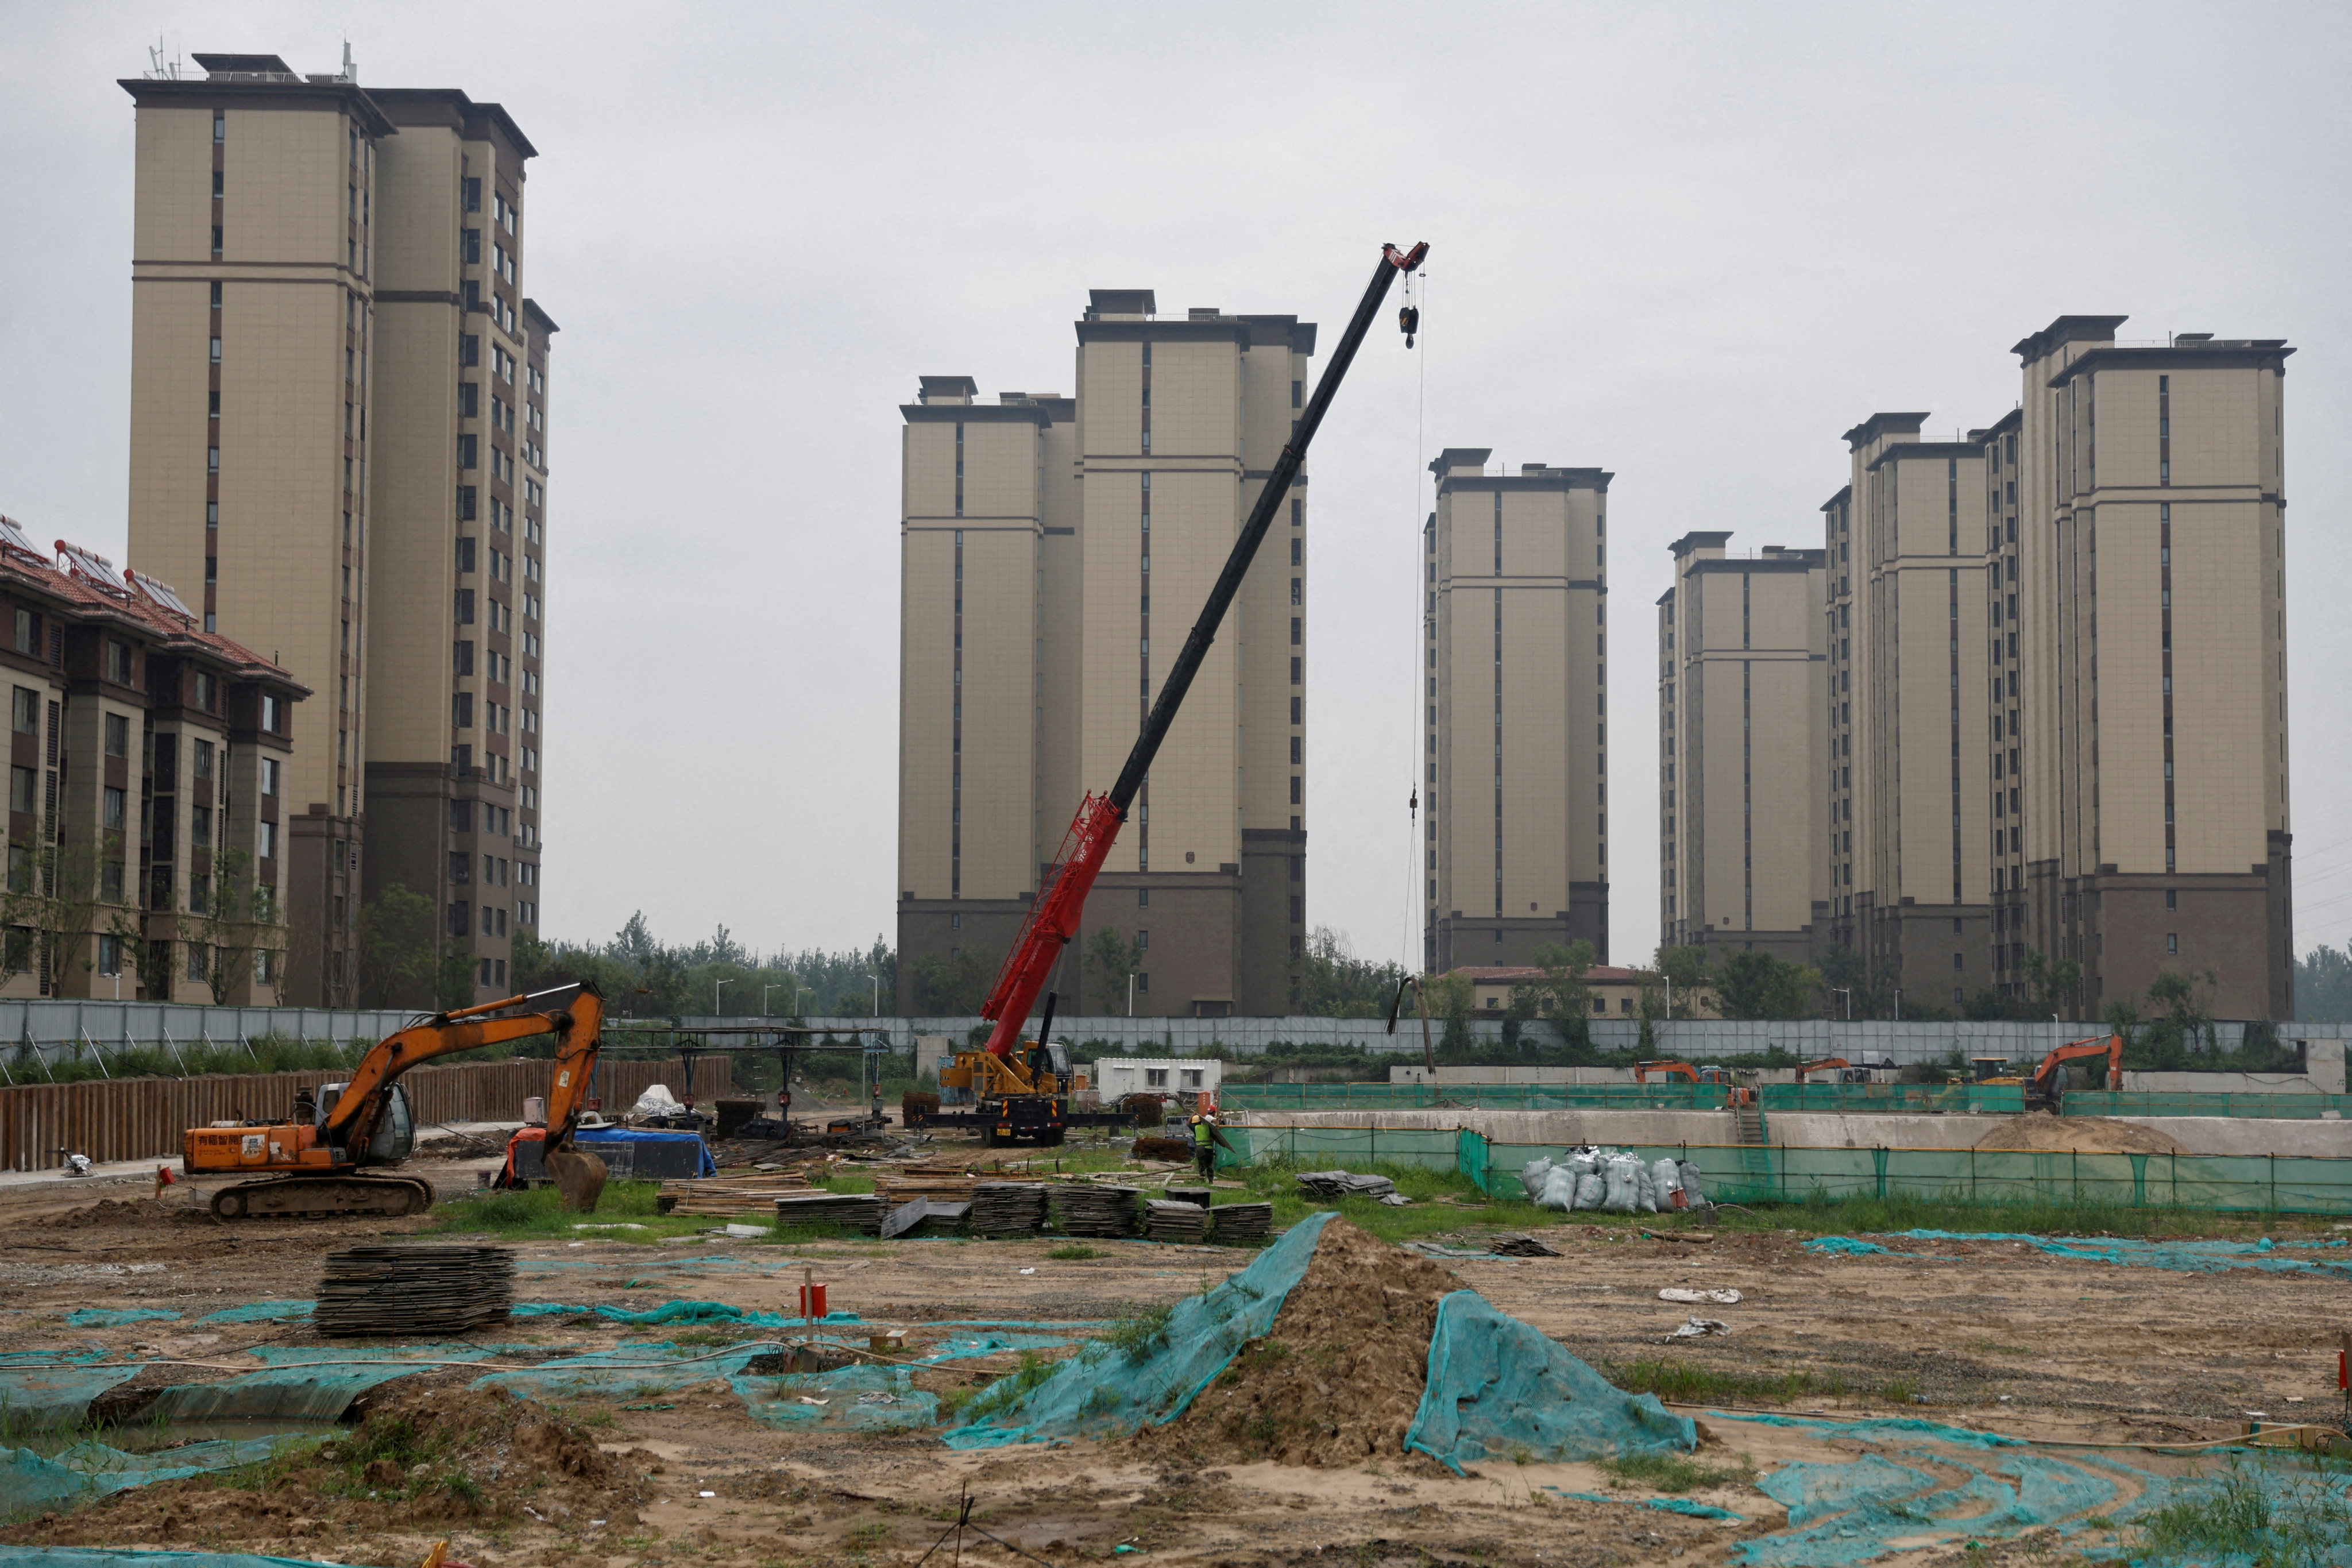 China hunts for new industrial 'pillars' to replace a wobbly property market  | South China Morning Post